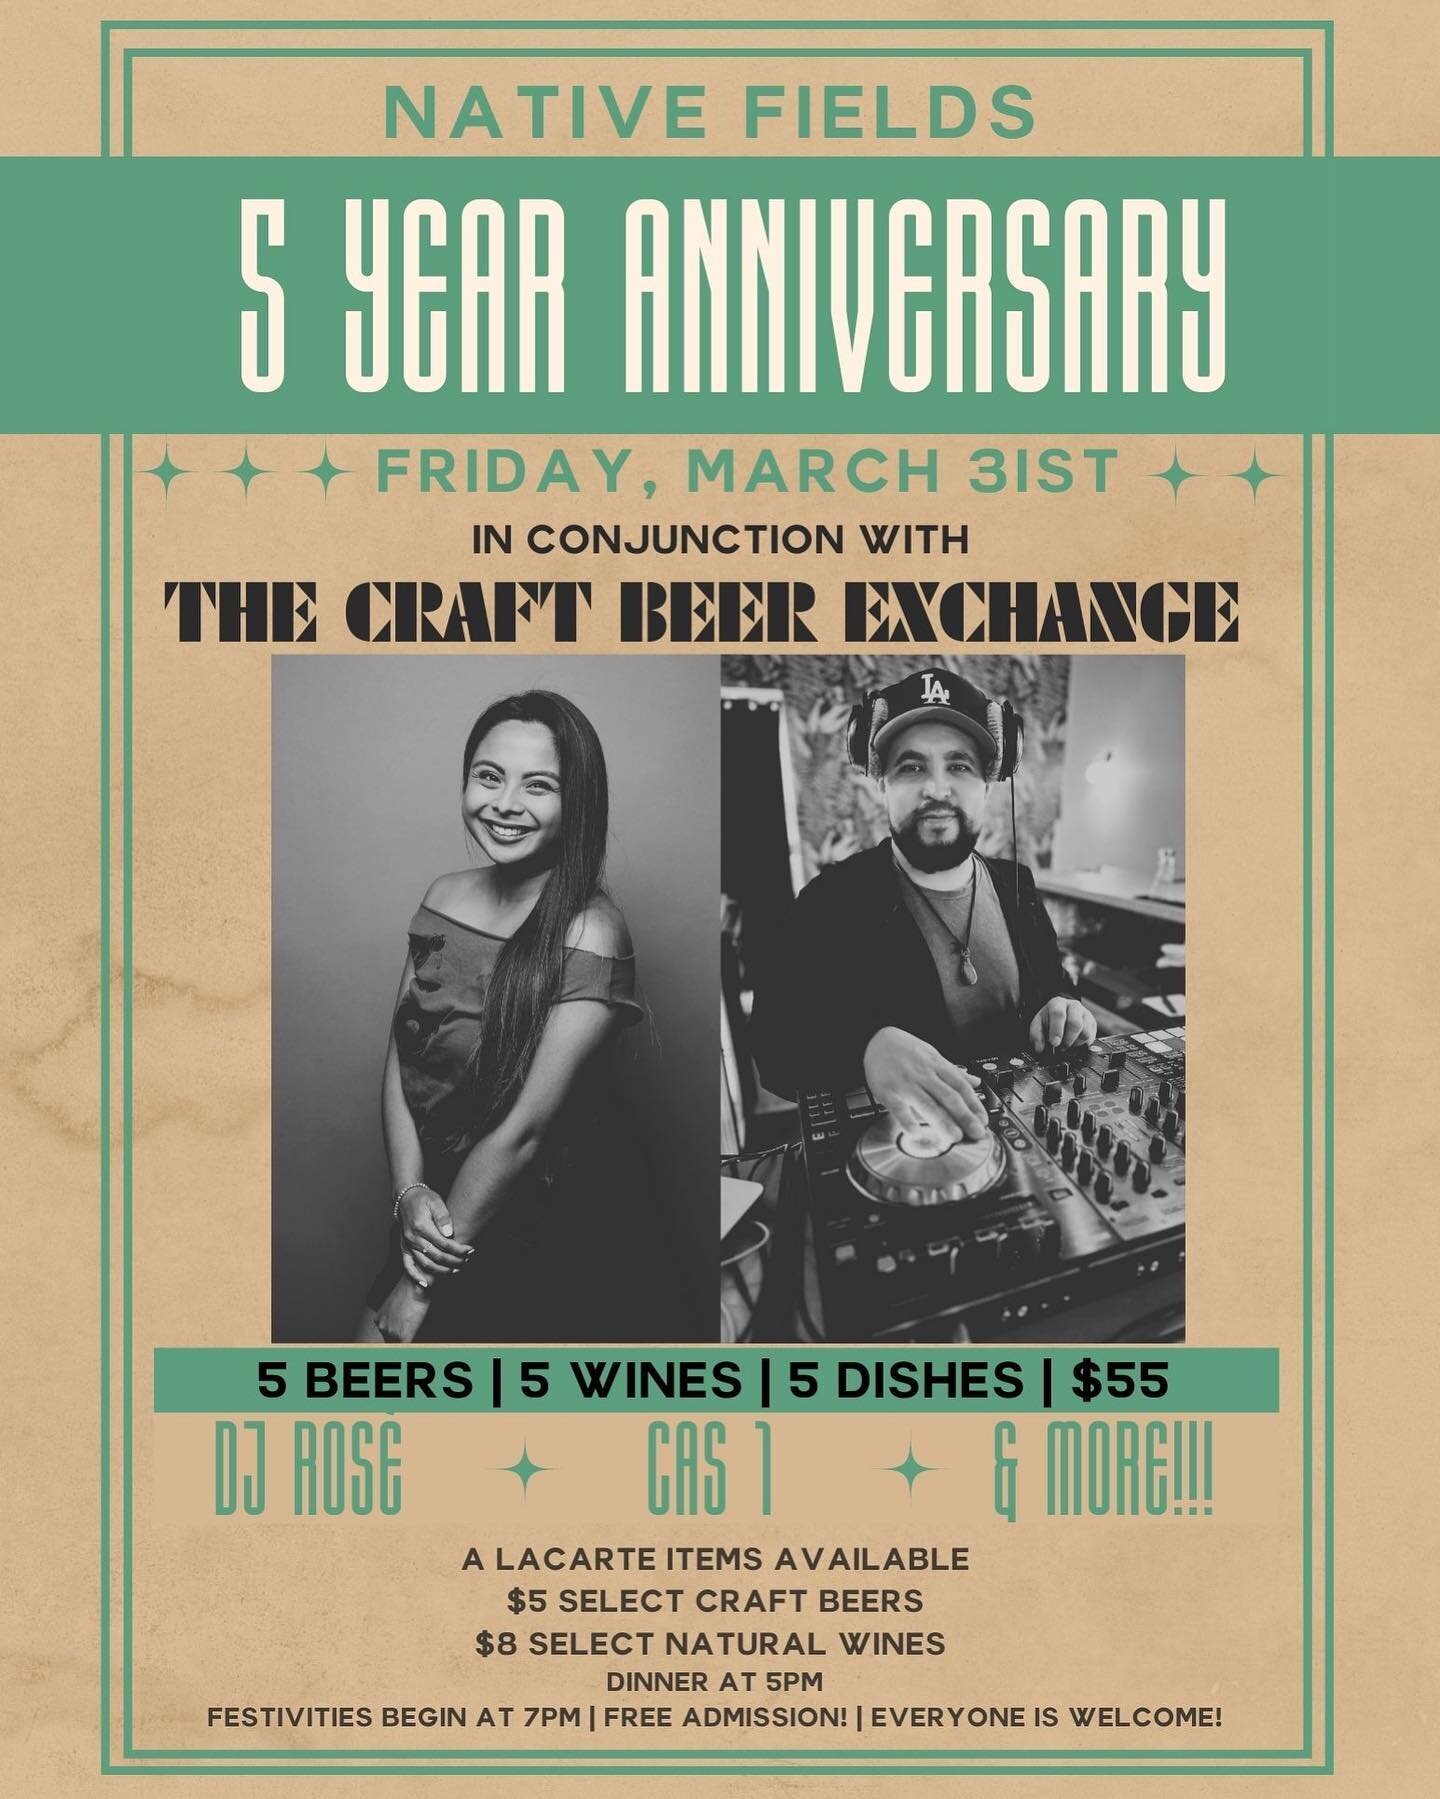 Join Us this Friday!

It&rsquo;s Our Birthday! 
March 31st
Dinner Starts 5pm
Festivities Begin at 7pm-11pm

In Conjunction with Our Homies 
The Craft Beer Exchange

In Honor of Women&rsquo;s History Month
We Have Female Produced Beers, Wines and Musi